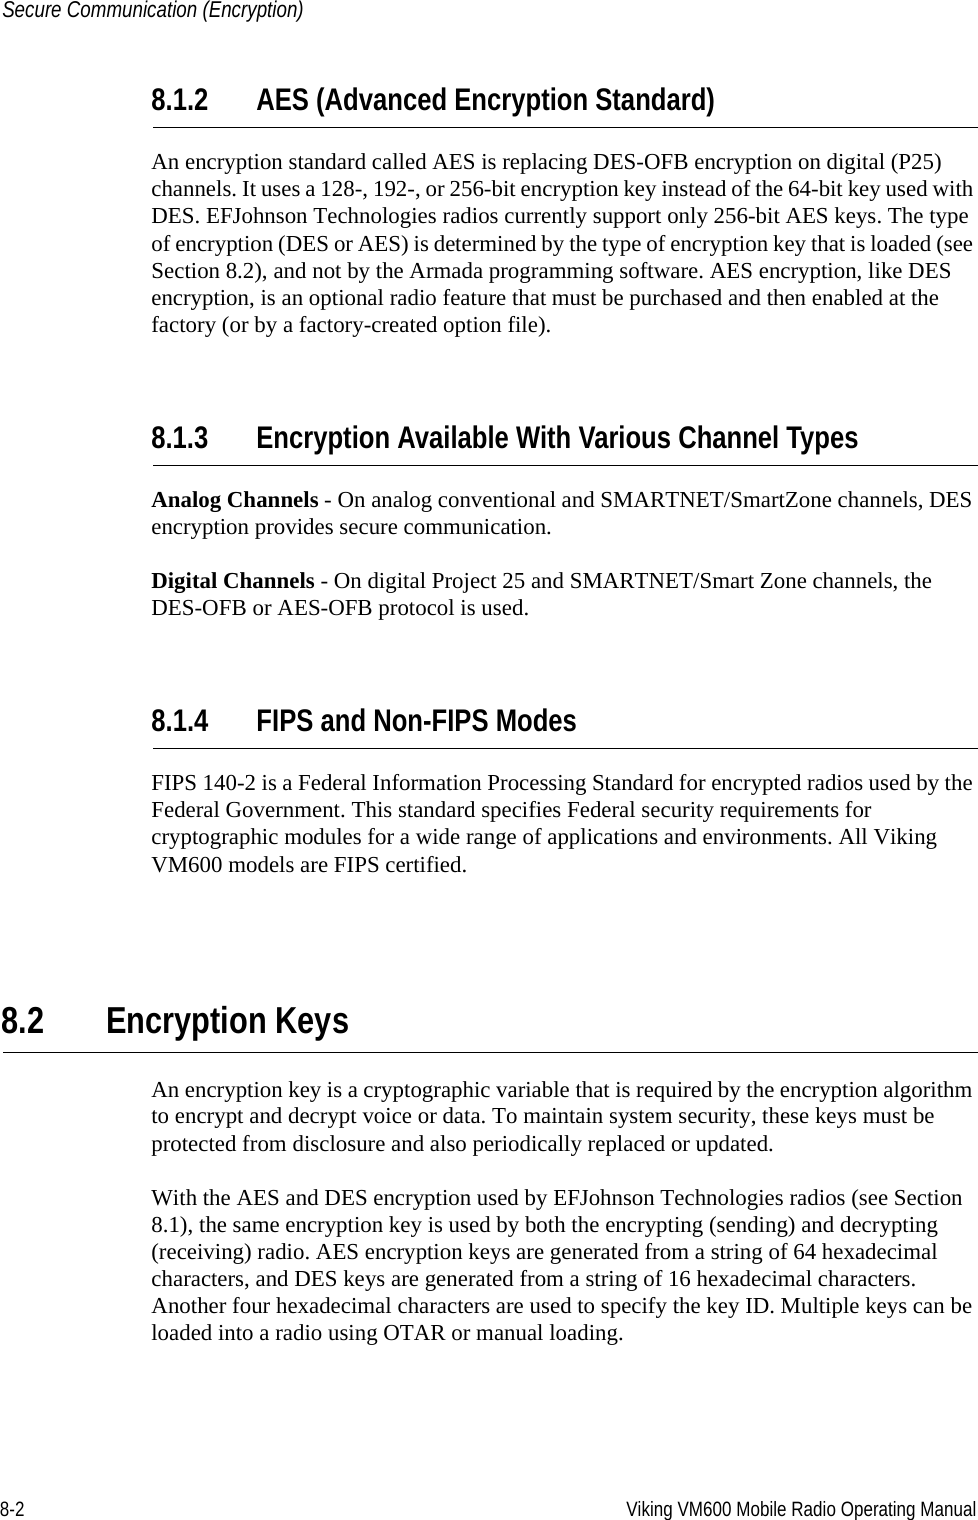 8-2 Viking VM600 Mobile Radio Operating ManualSecure Communication (Encryption)8.1.2 AES (Advanced Encryption Standard)An encryption standard called AES is replacing DES-OFB encryption on digital (P25) channels. It uses a 128-, 192-, or 256-bit encryption key instead of the 64-bit key used with DES. EFJohnson Technologies radios currently support only 256-bit AES keys. The type of encryption (DES or AES) is determined by the type of encryption key that is loaded (see Section 8.2), and not by the Armada programming software. AES encryption, like DES encryption, is an optional radio feature that must be purchased and then enabled at the factory (or by a factory-created option file).8.1.3 Encryption Available With Various Channel TypesAnalog Channels - On analog conventional and SMARTNET/SmartZone channels, DES encryption provides secure communication.Digital Channels - On digital Project 25 and SMARTNET/Smart Zone channels, the DES-OFB or AES-OFB protocol is used.8.1.4 FIPS and Non-FIPS ModesFIPS 140-2 is a Federal Information Processing Standard for encrypted radios used by the Federal Government. This standard specifies Federal security requirements for cryptographic modules for a wide range of applications and environments. All Viking VM600 models are FIPS certified.8.2 Encryption KeysAn encryption key is a cryptographic variable that is required by the encryption algorithm to encrypt and decrypt voice or data. To maintain system security, these keys must be protected from disclosure and also periodically replaced or updated.With the AES and DES encryption used by EFJohnson Technologies radios (see Section 8.1), the same encryption key is used by both the encrypting (sending) and decrypting (receiving) radio. AES encryption keys are generated from a string of 64 hexadecimal characters, and DES keys are generated from a string of 16 hexadecimal characters. Another four hexadecimal characters are used to specify the key ID. Multiple keys can be loaded into a radio using OTAR or manual loading.Draft 4/29/2014